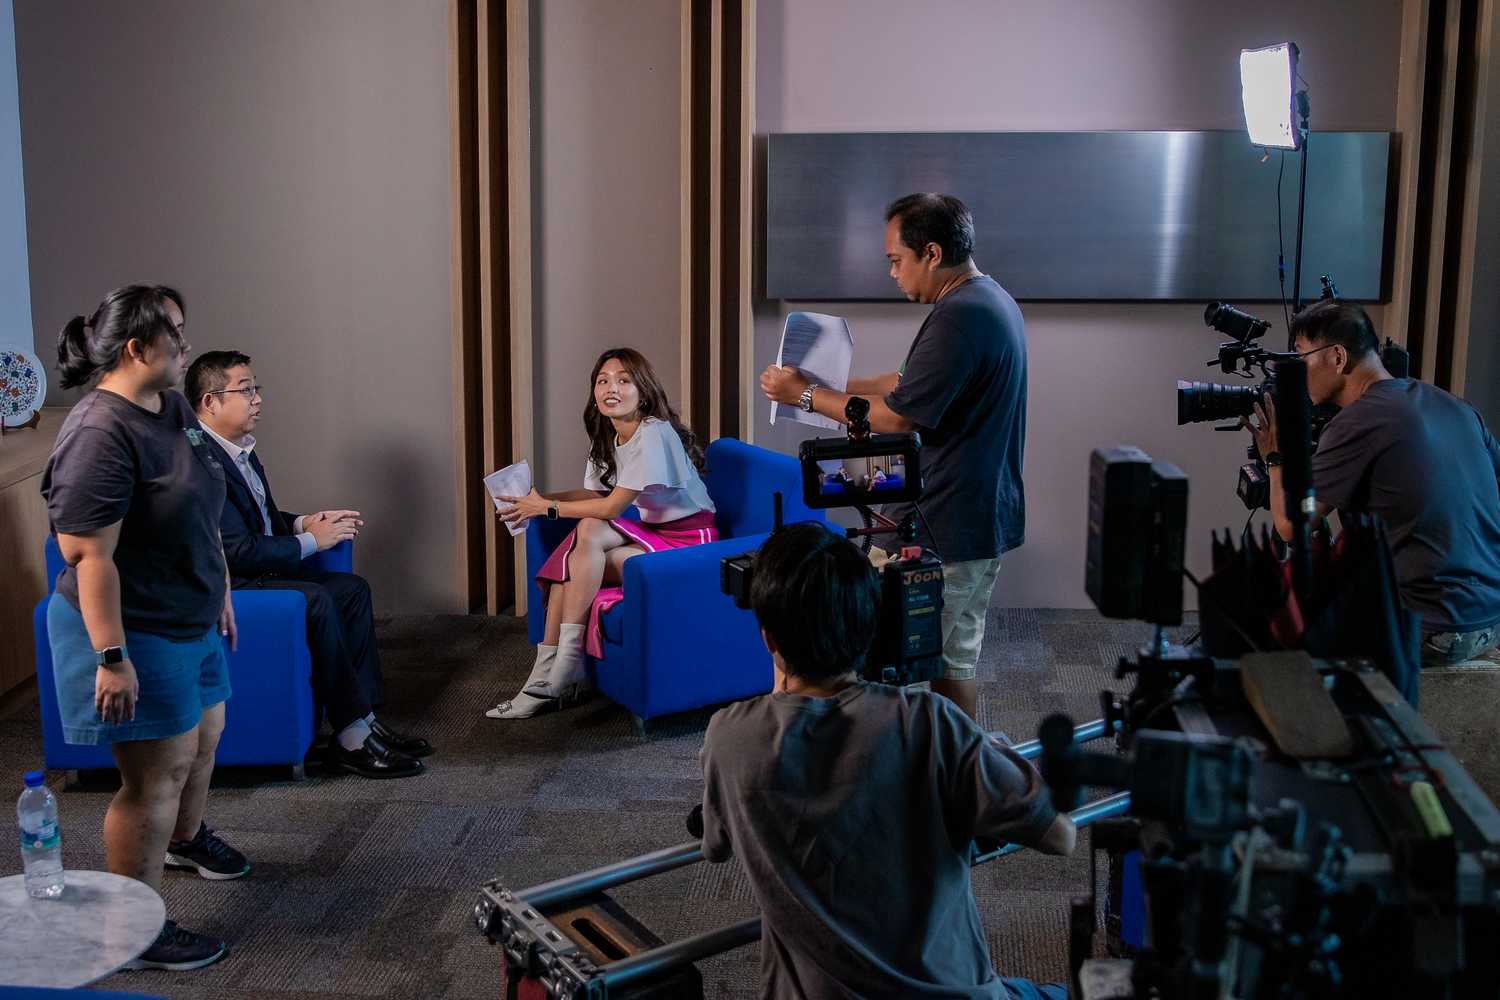 The picture depicts Mediacorp artiste Hazelle Teo interviewing NCPC Council Member Mr Nicholas Aaron Khoo for a 2023 Scam Alert segment. Behind them, the crew is filming.